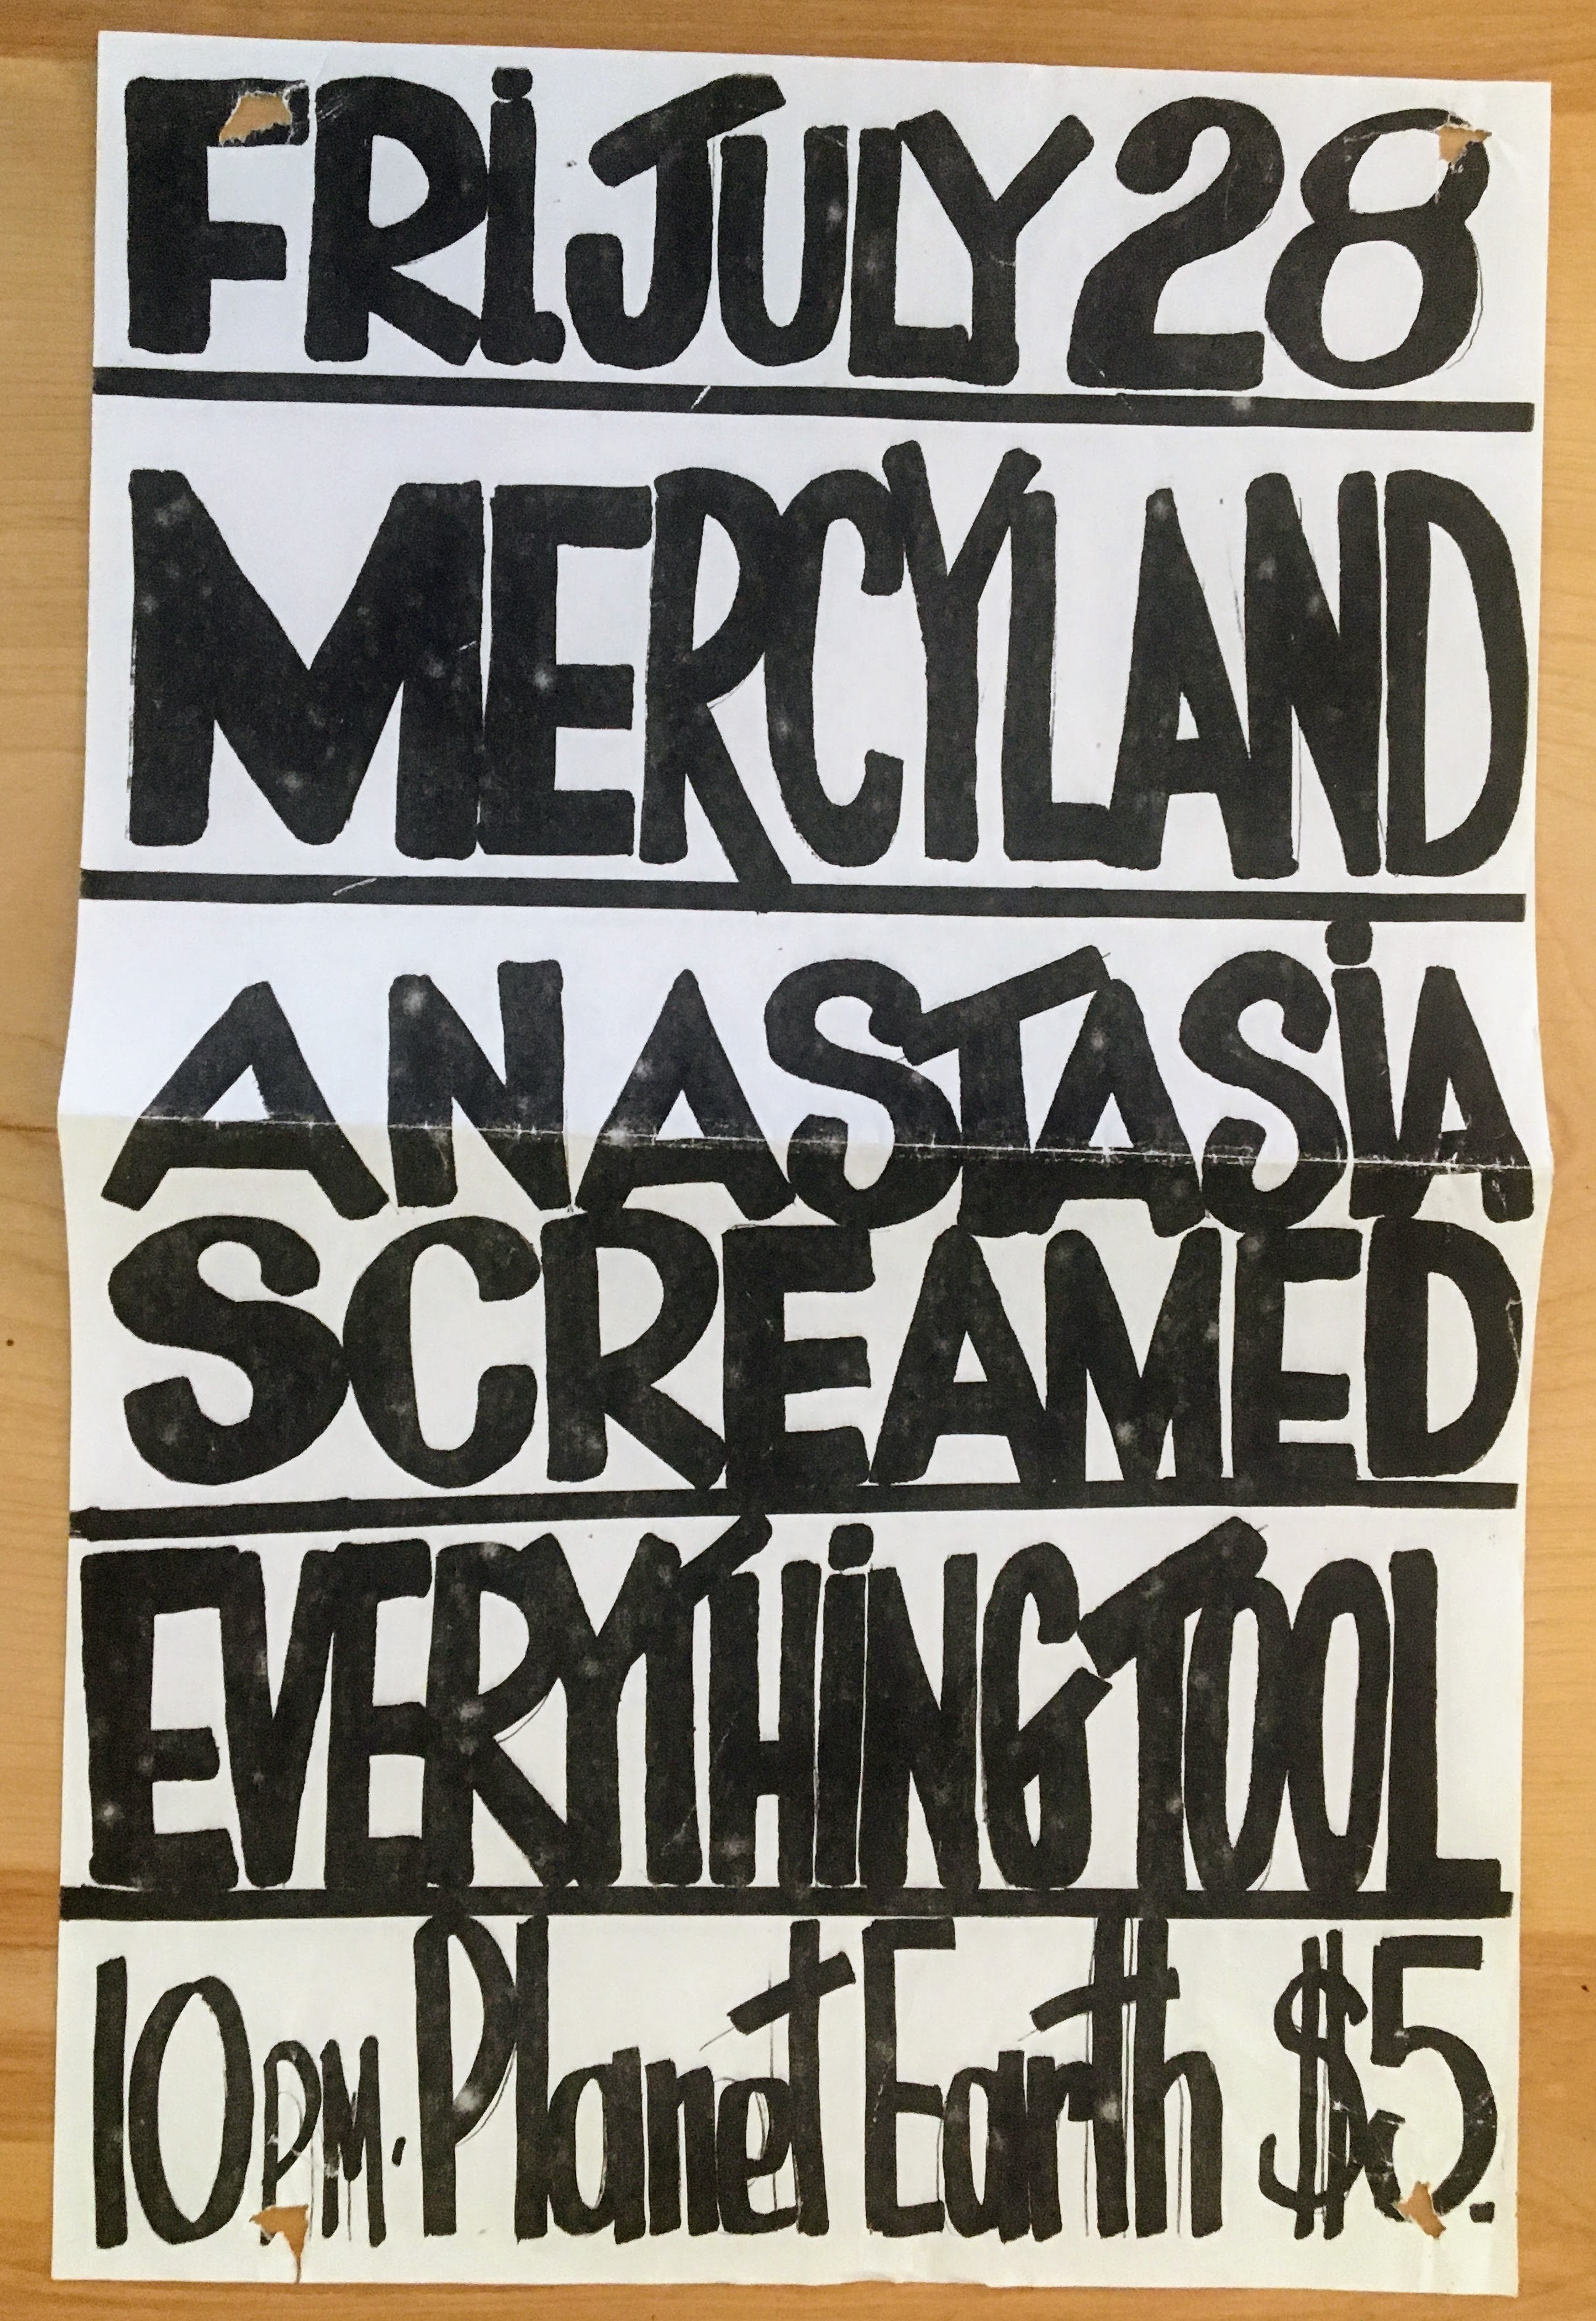 Mercyland, Anastasia Screamed, Everything Tool at Planet Earth, Knoxville, 1989(?)